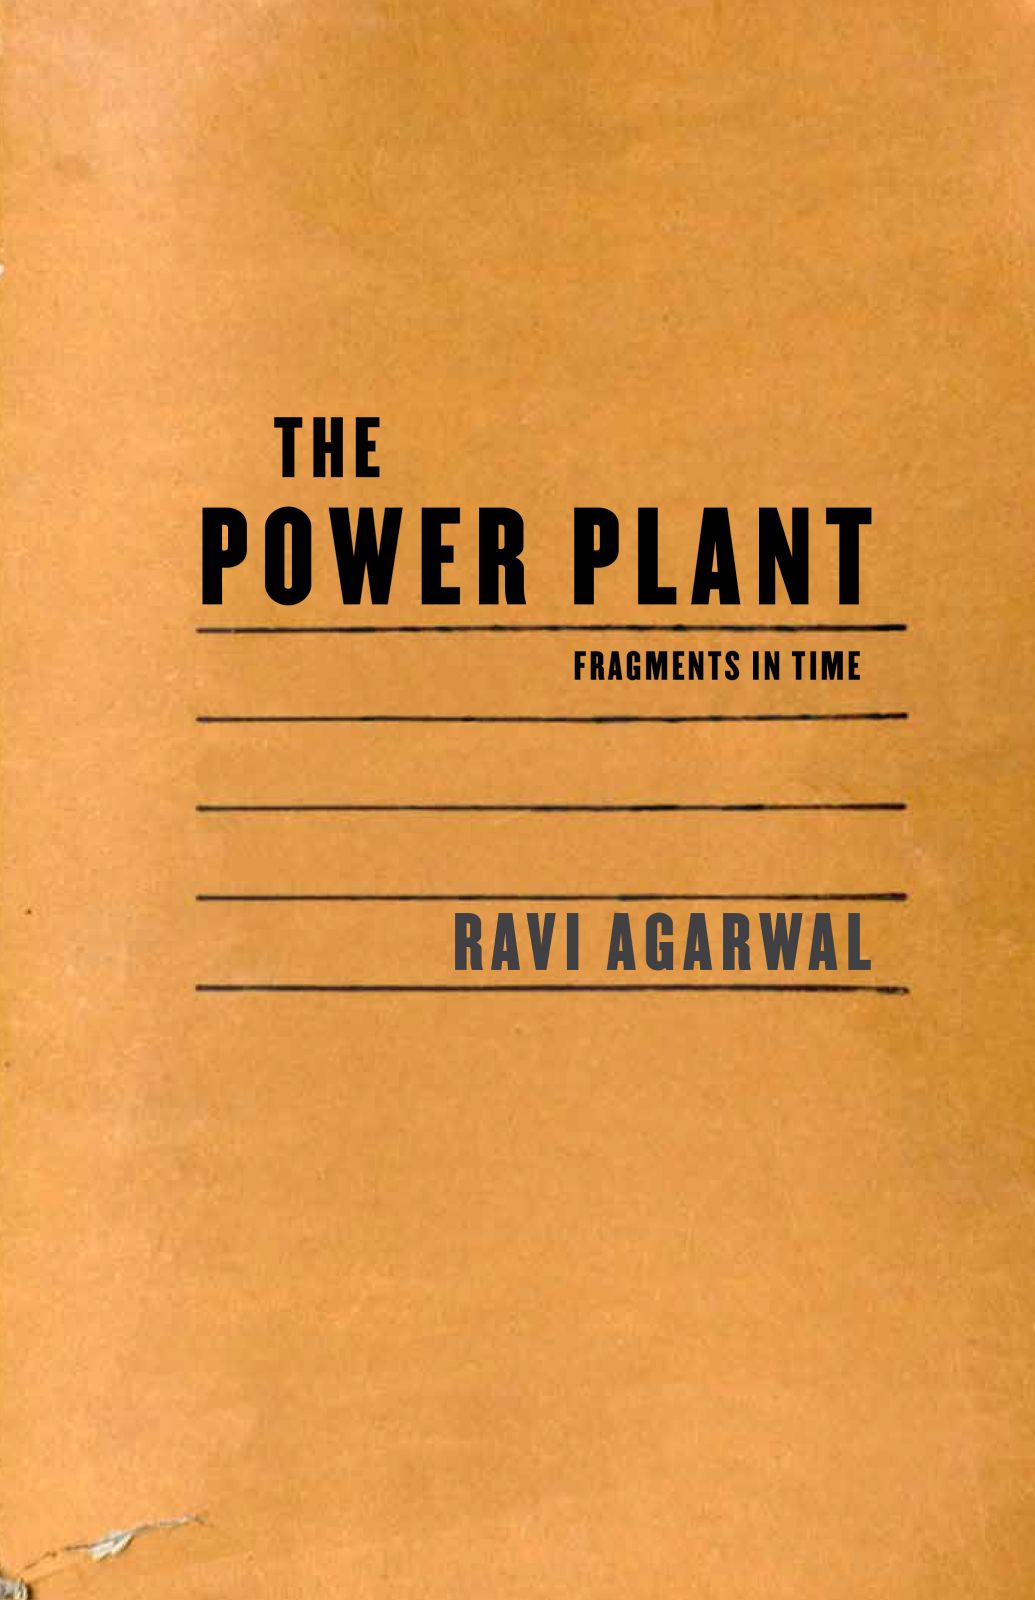 The Power Plant: Fragments in Time — by Ravi Agarwal